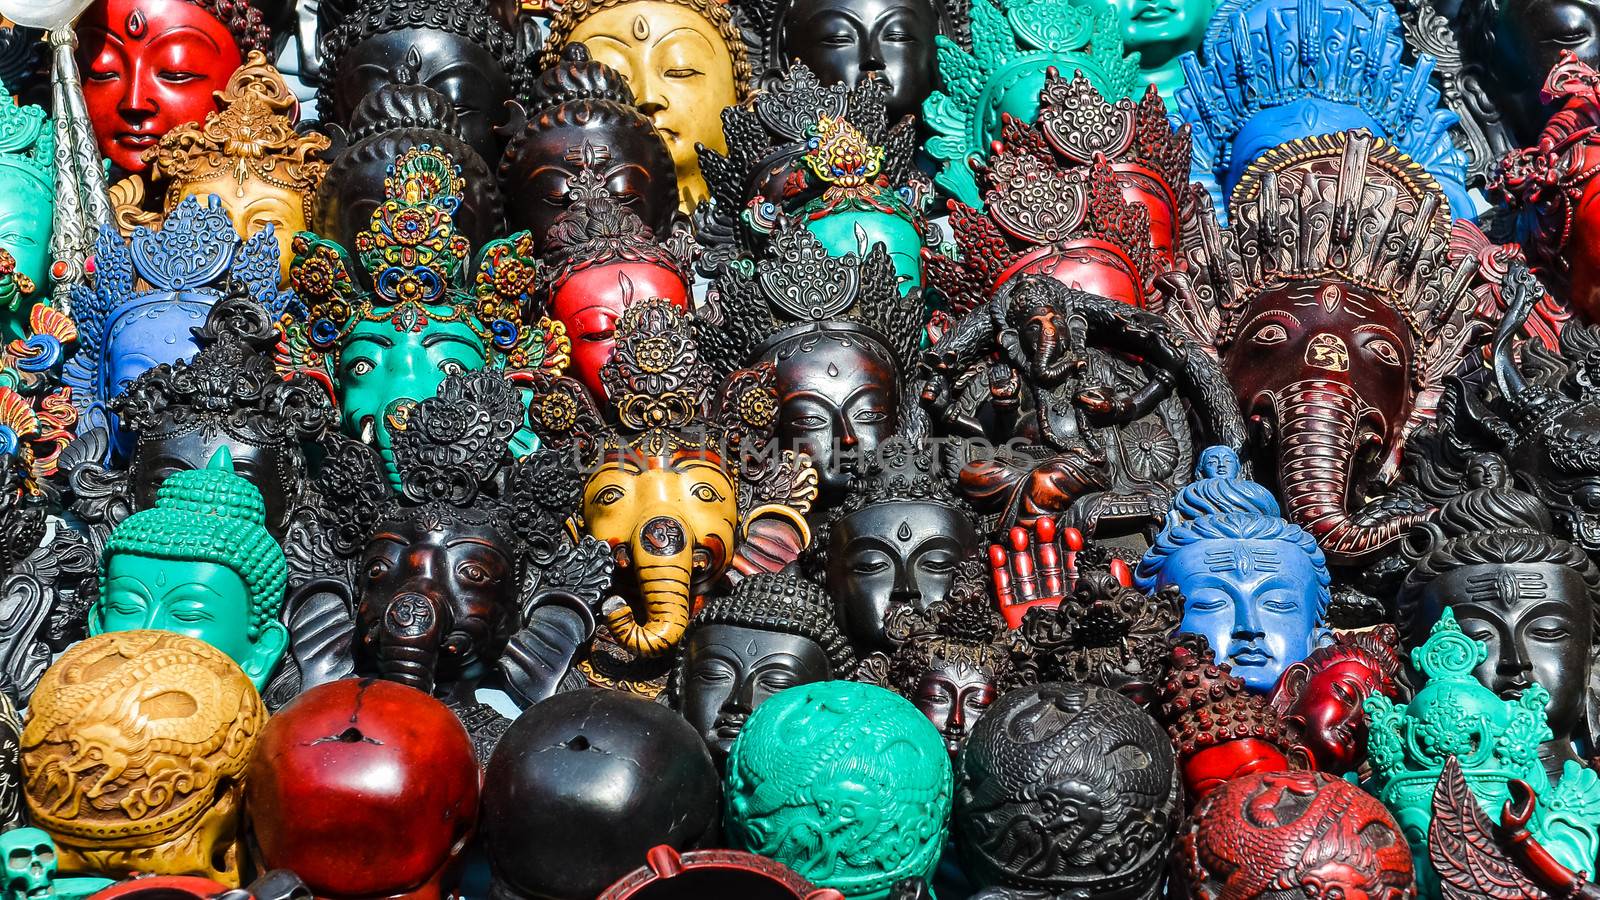 Detail of various wooden carved masks and decorations, market in Kathmandu